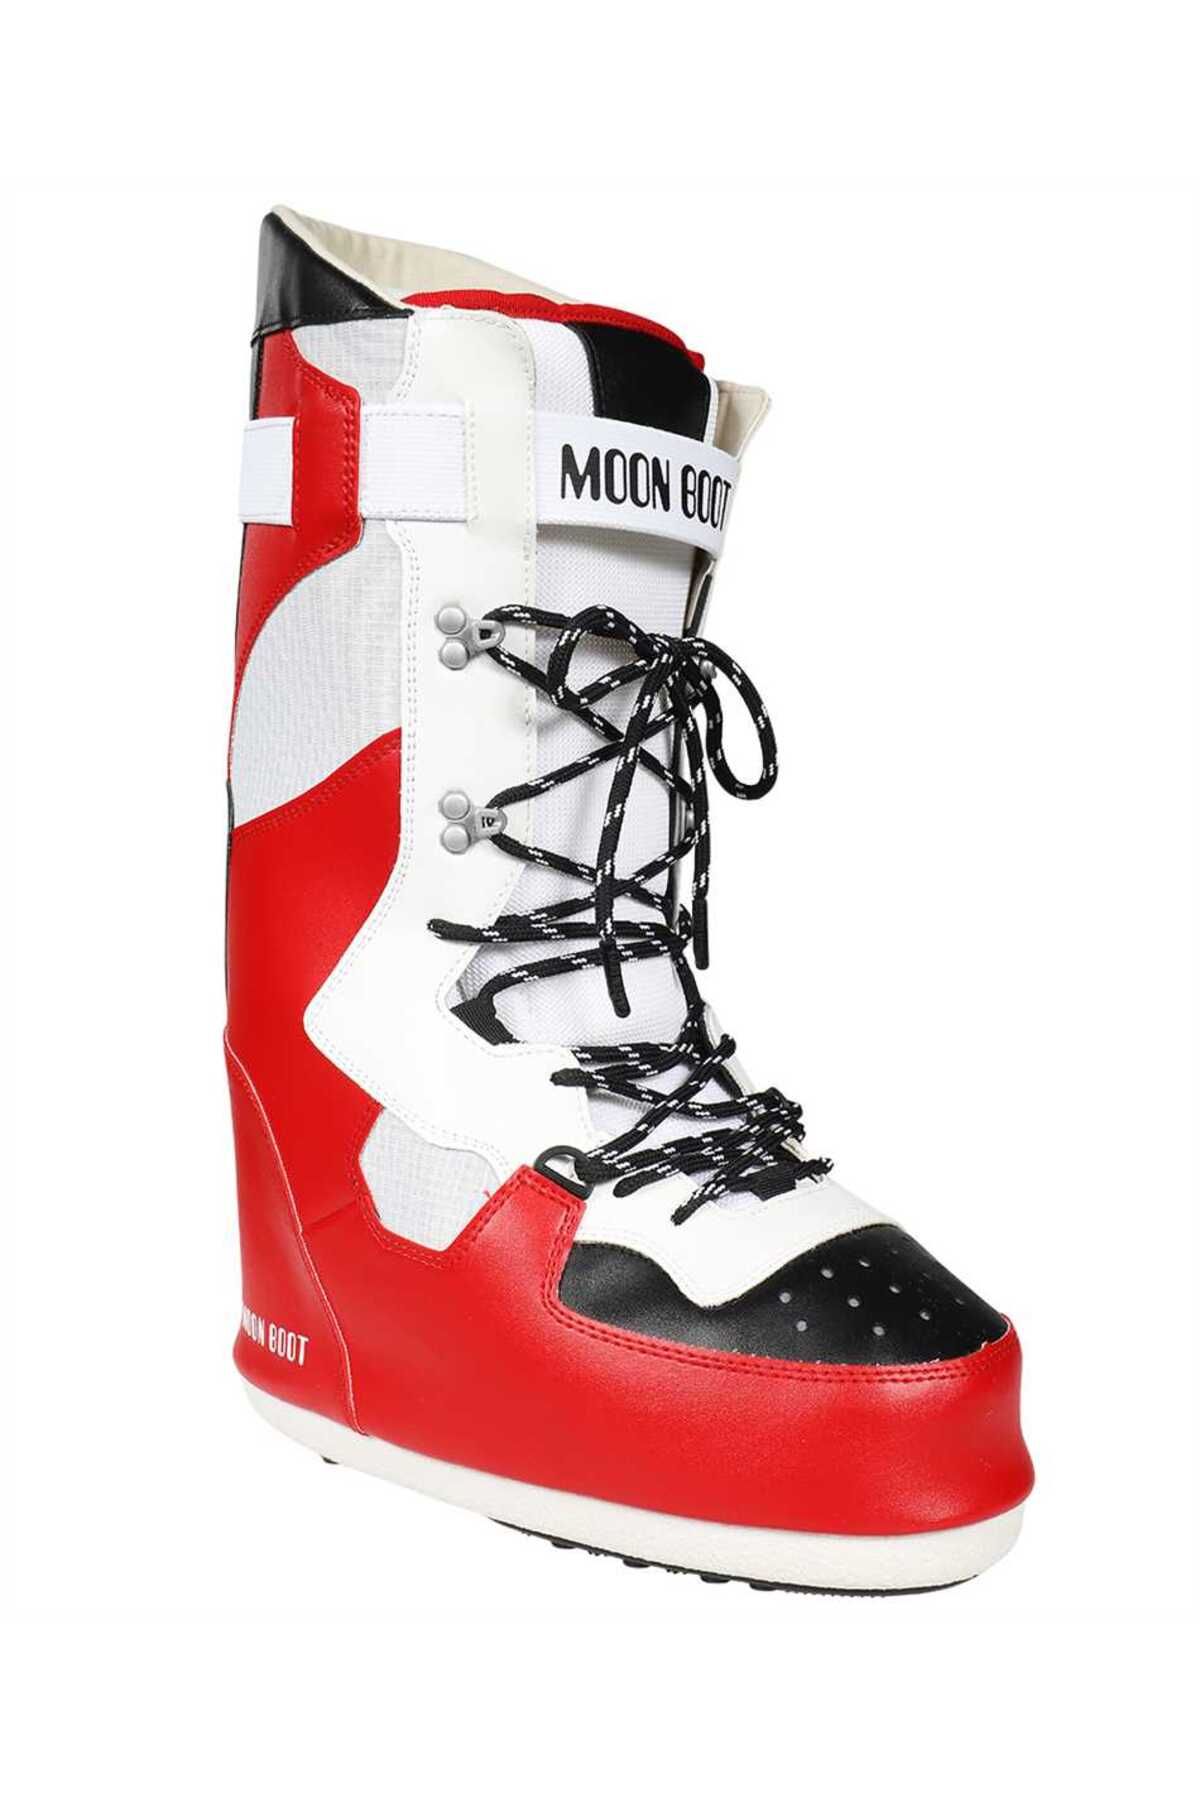 Moon Boot 14028300-003 High Sneaker Boot Red